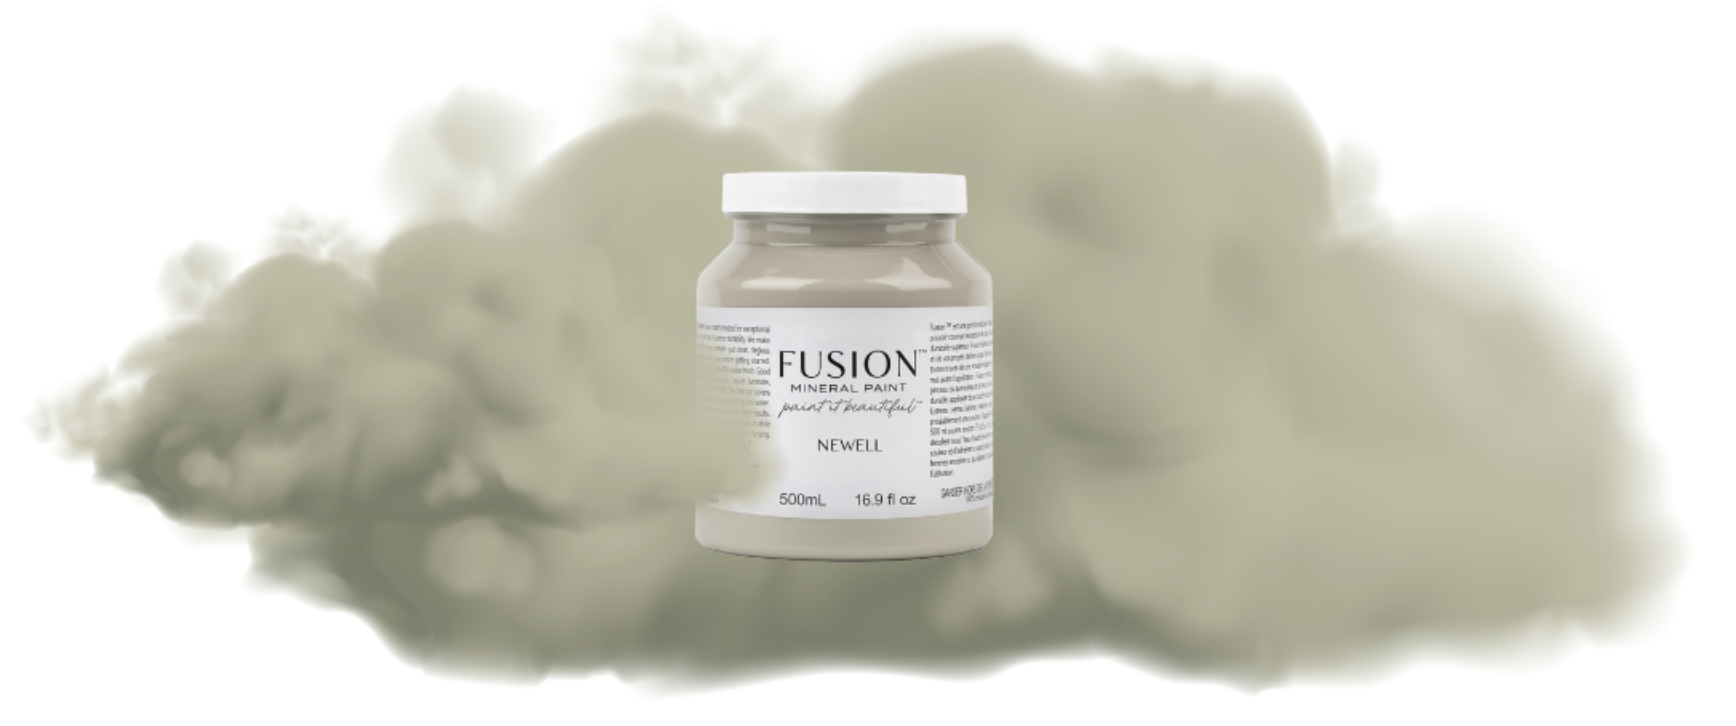 Newell, Sage Green Colour Furniture Paint, Fusion Mineral Paint, Vintage Frog Surrey UK Stockist